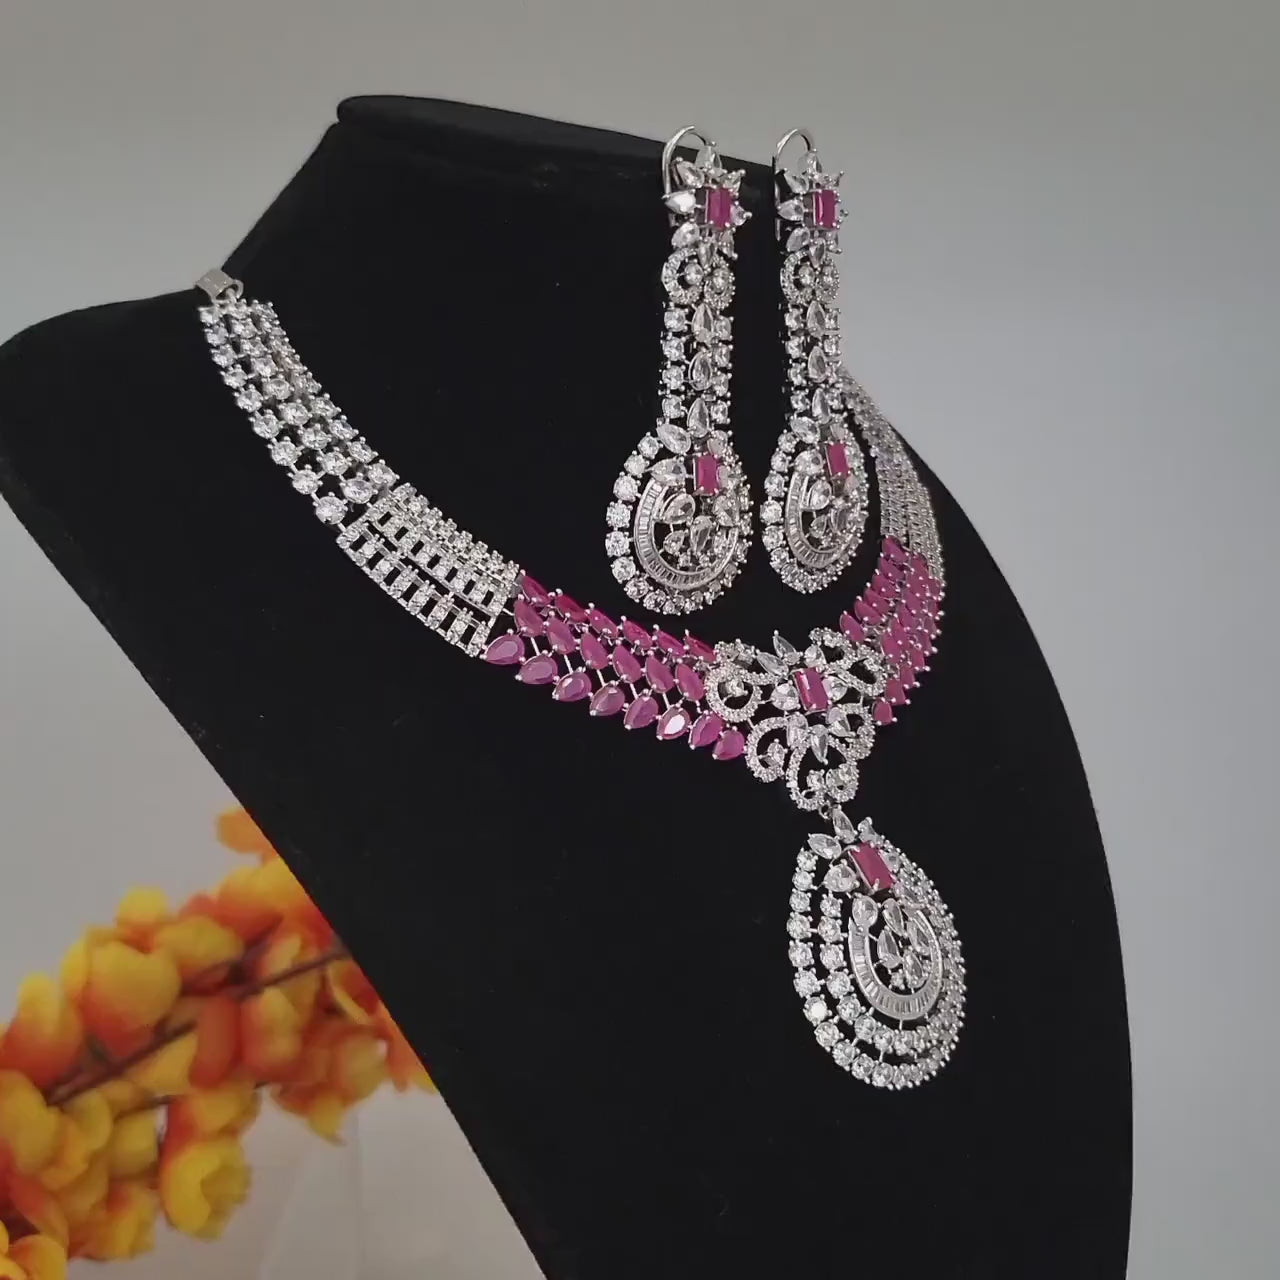 Exclusive Silver Polish American Diamond Collar necklace Earring set| Ruby Topaz AD stone necklace sets| CZ Diamond jewelry | Gift for her